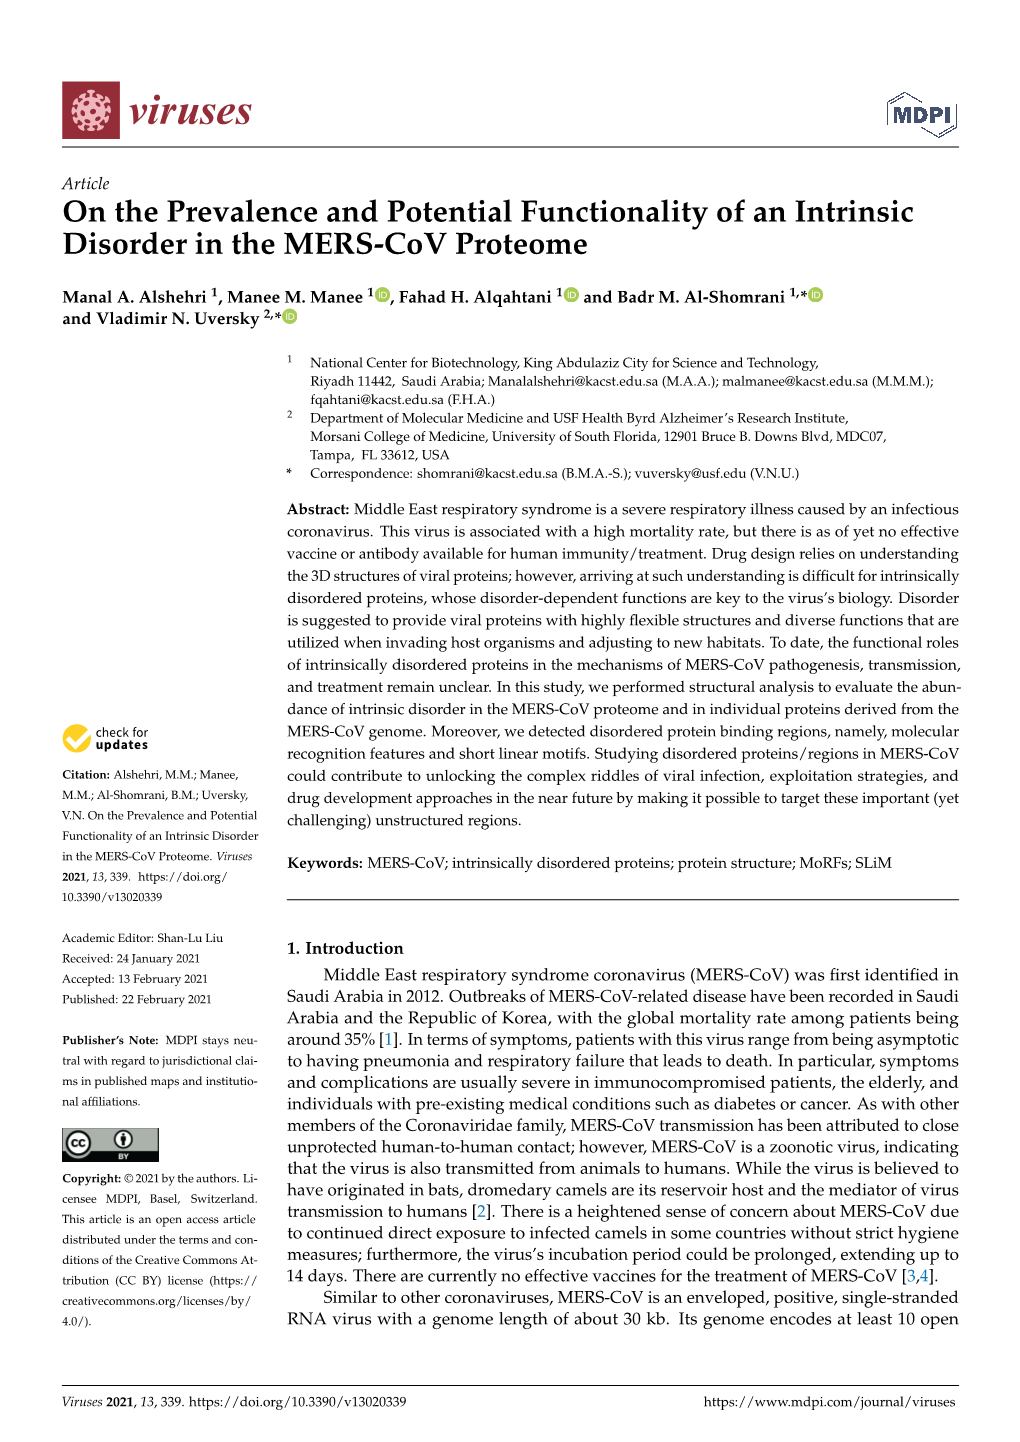 On the Prevalence and Potential Functionality of an Intrinsic Disorder in the MERS-Cov Proteome